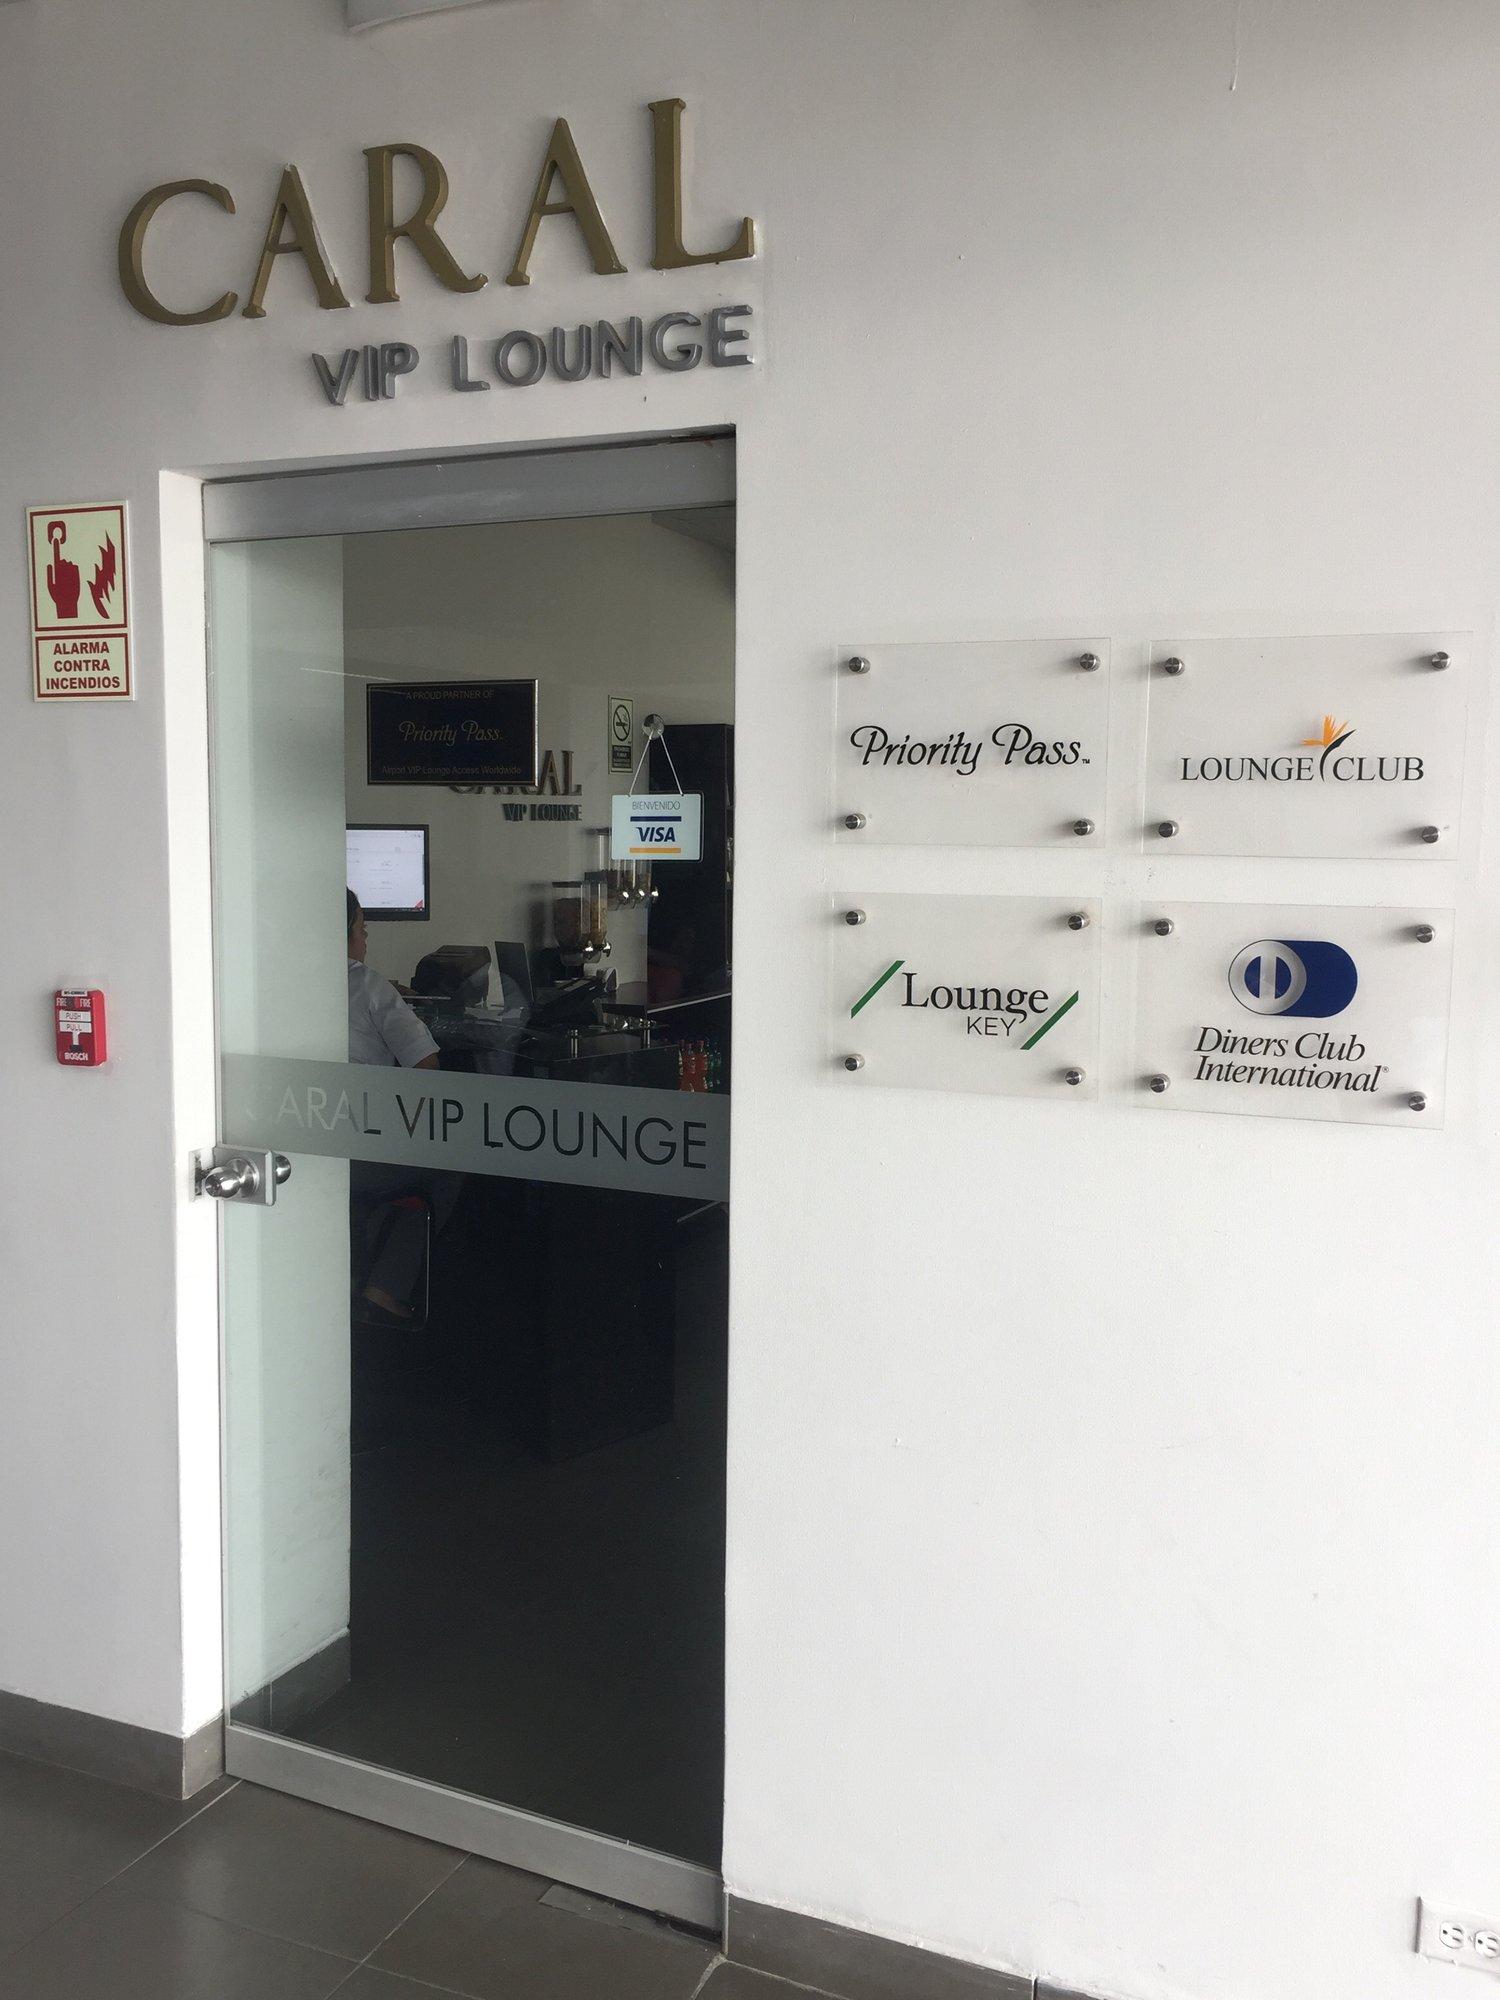 Caral VIP Lounge image 2 of 3